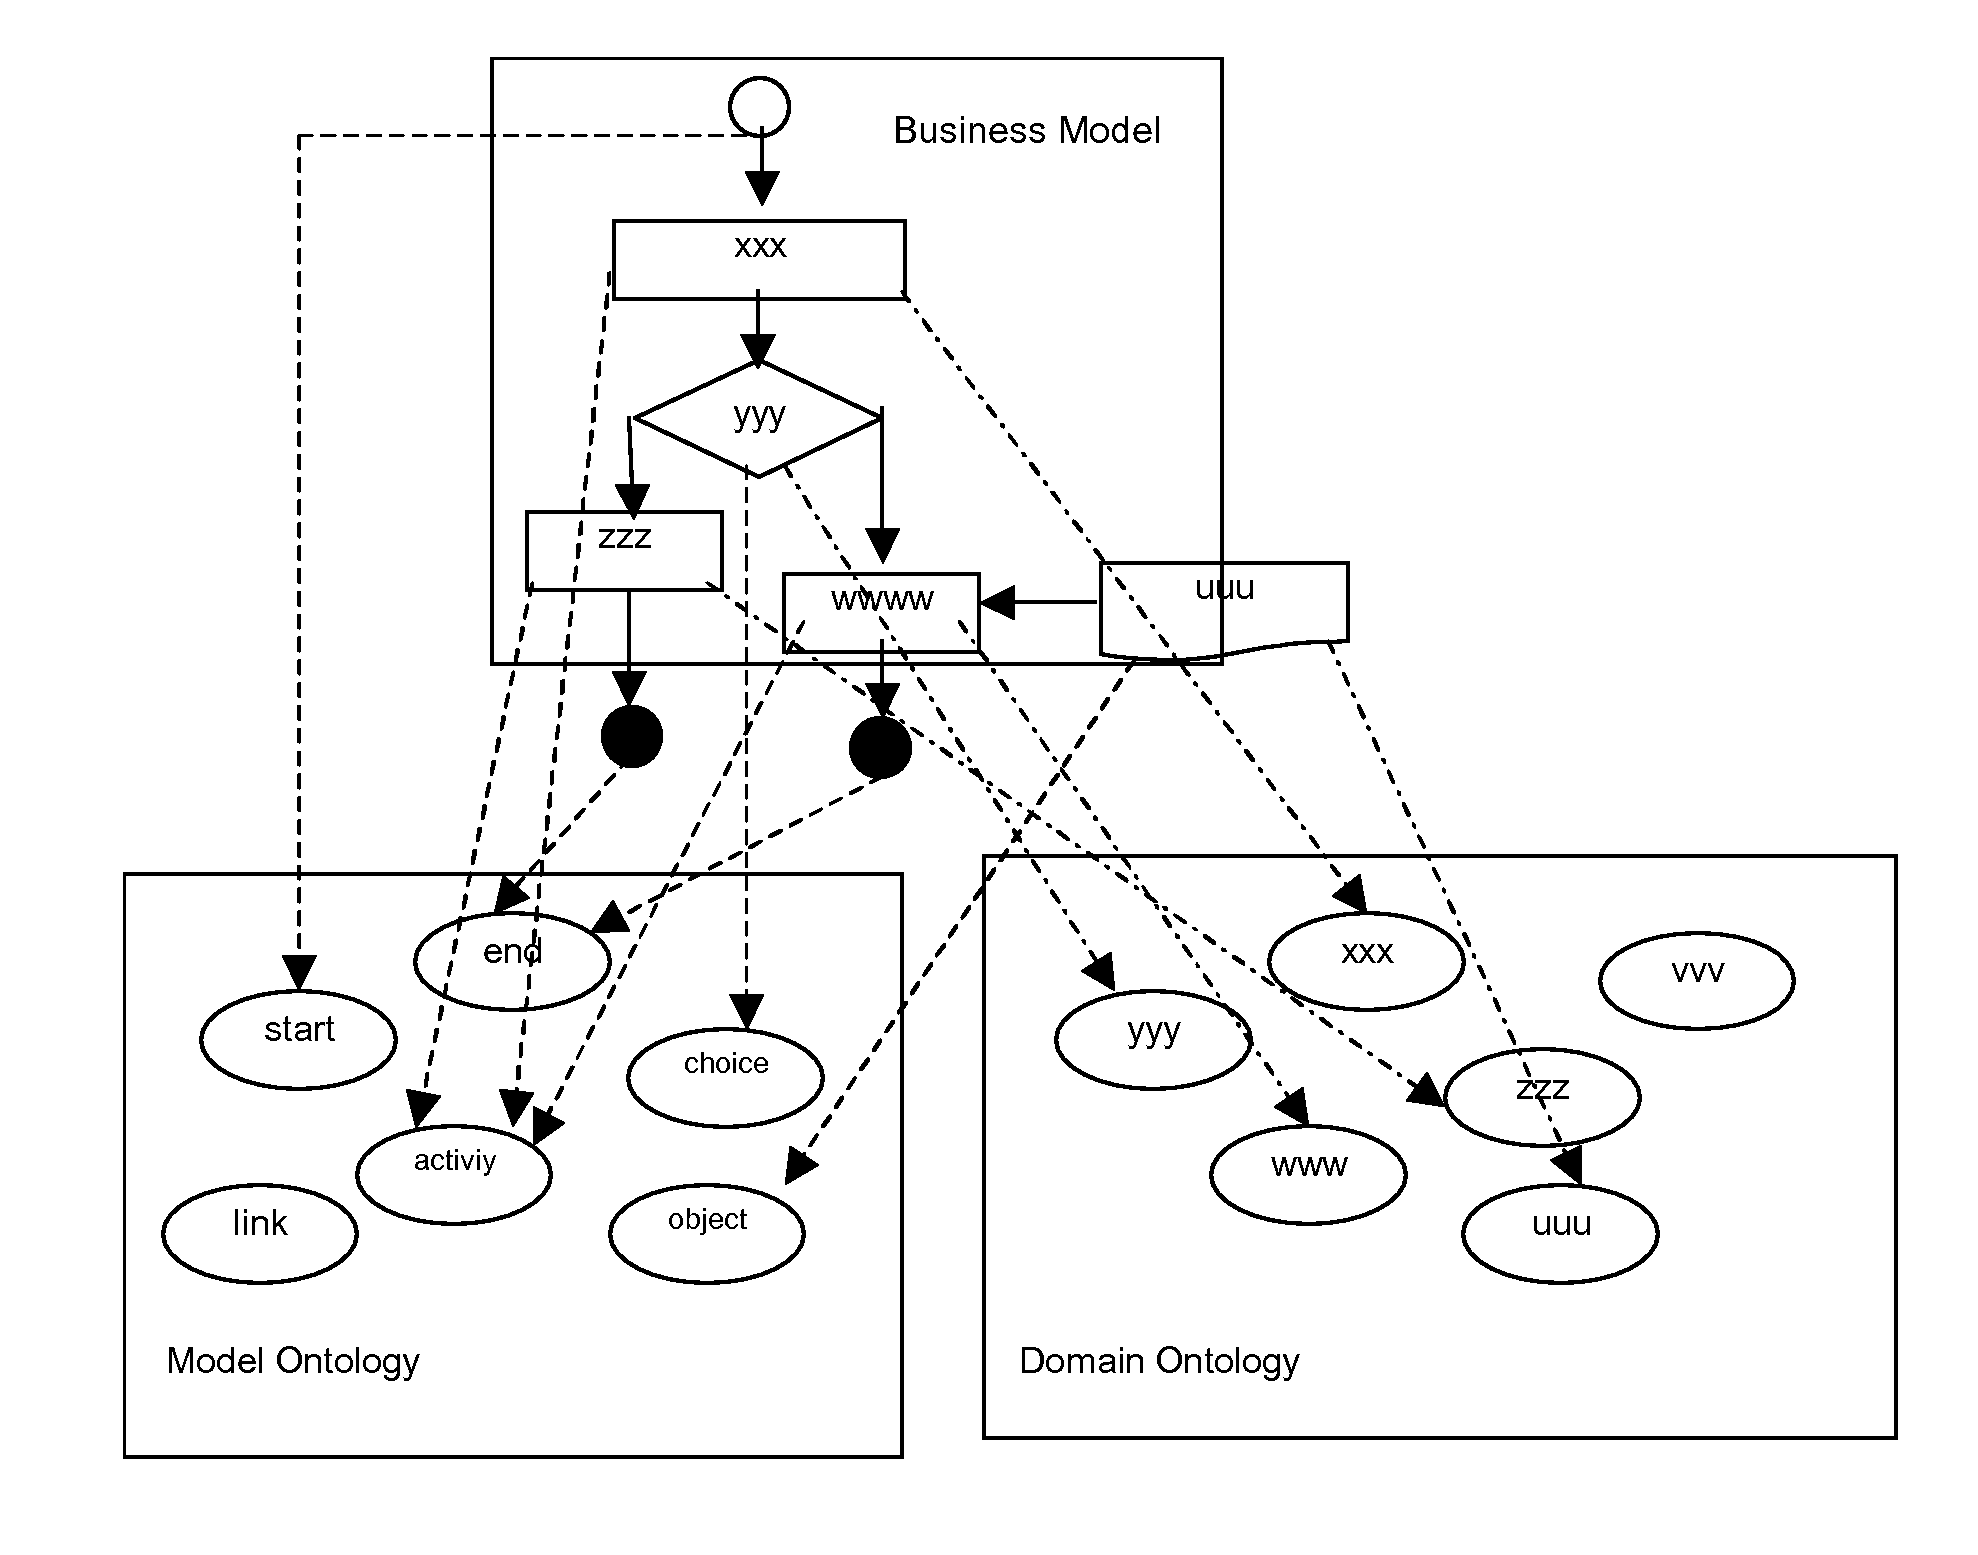 Method and apparatus to enable integrated computation of model-level and domain-level business semantics